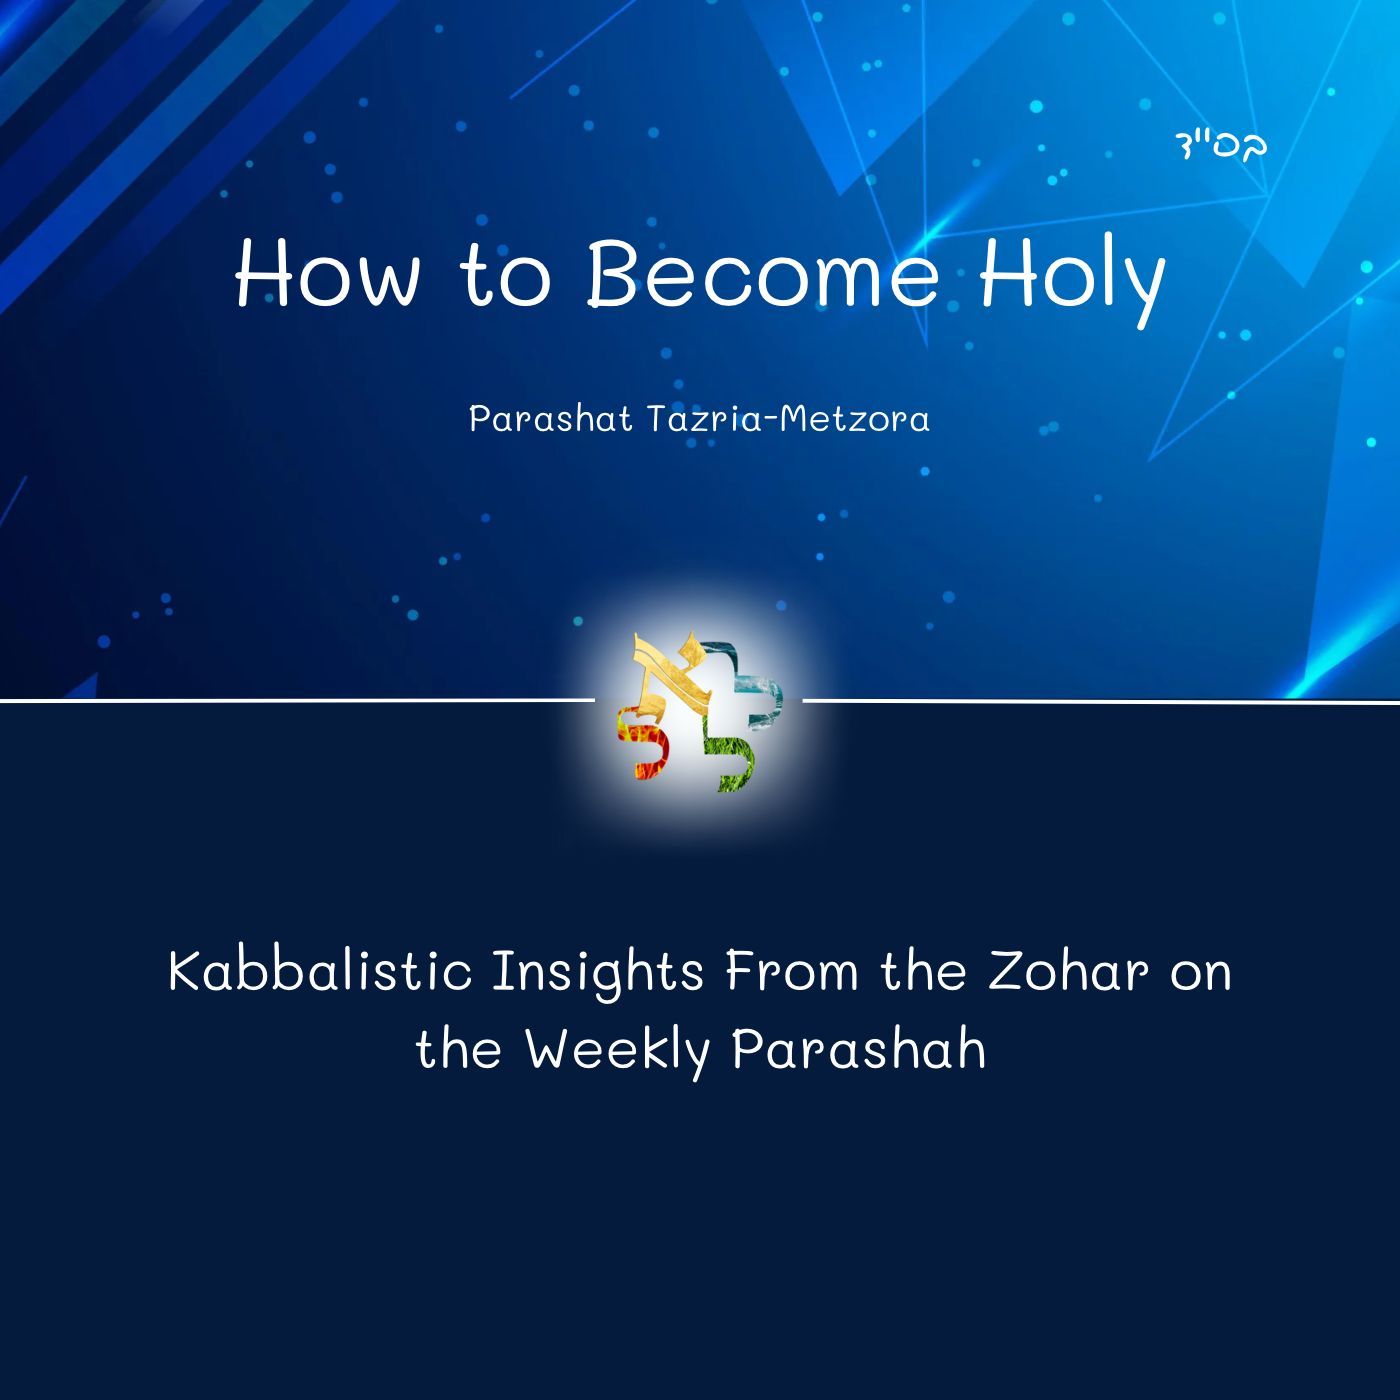 How to Become Holy - Kabbalistic Inspiration on the Parasha from the Zohar